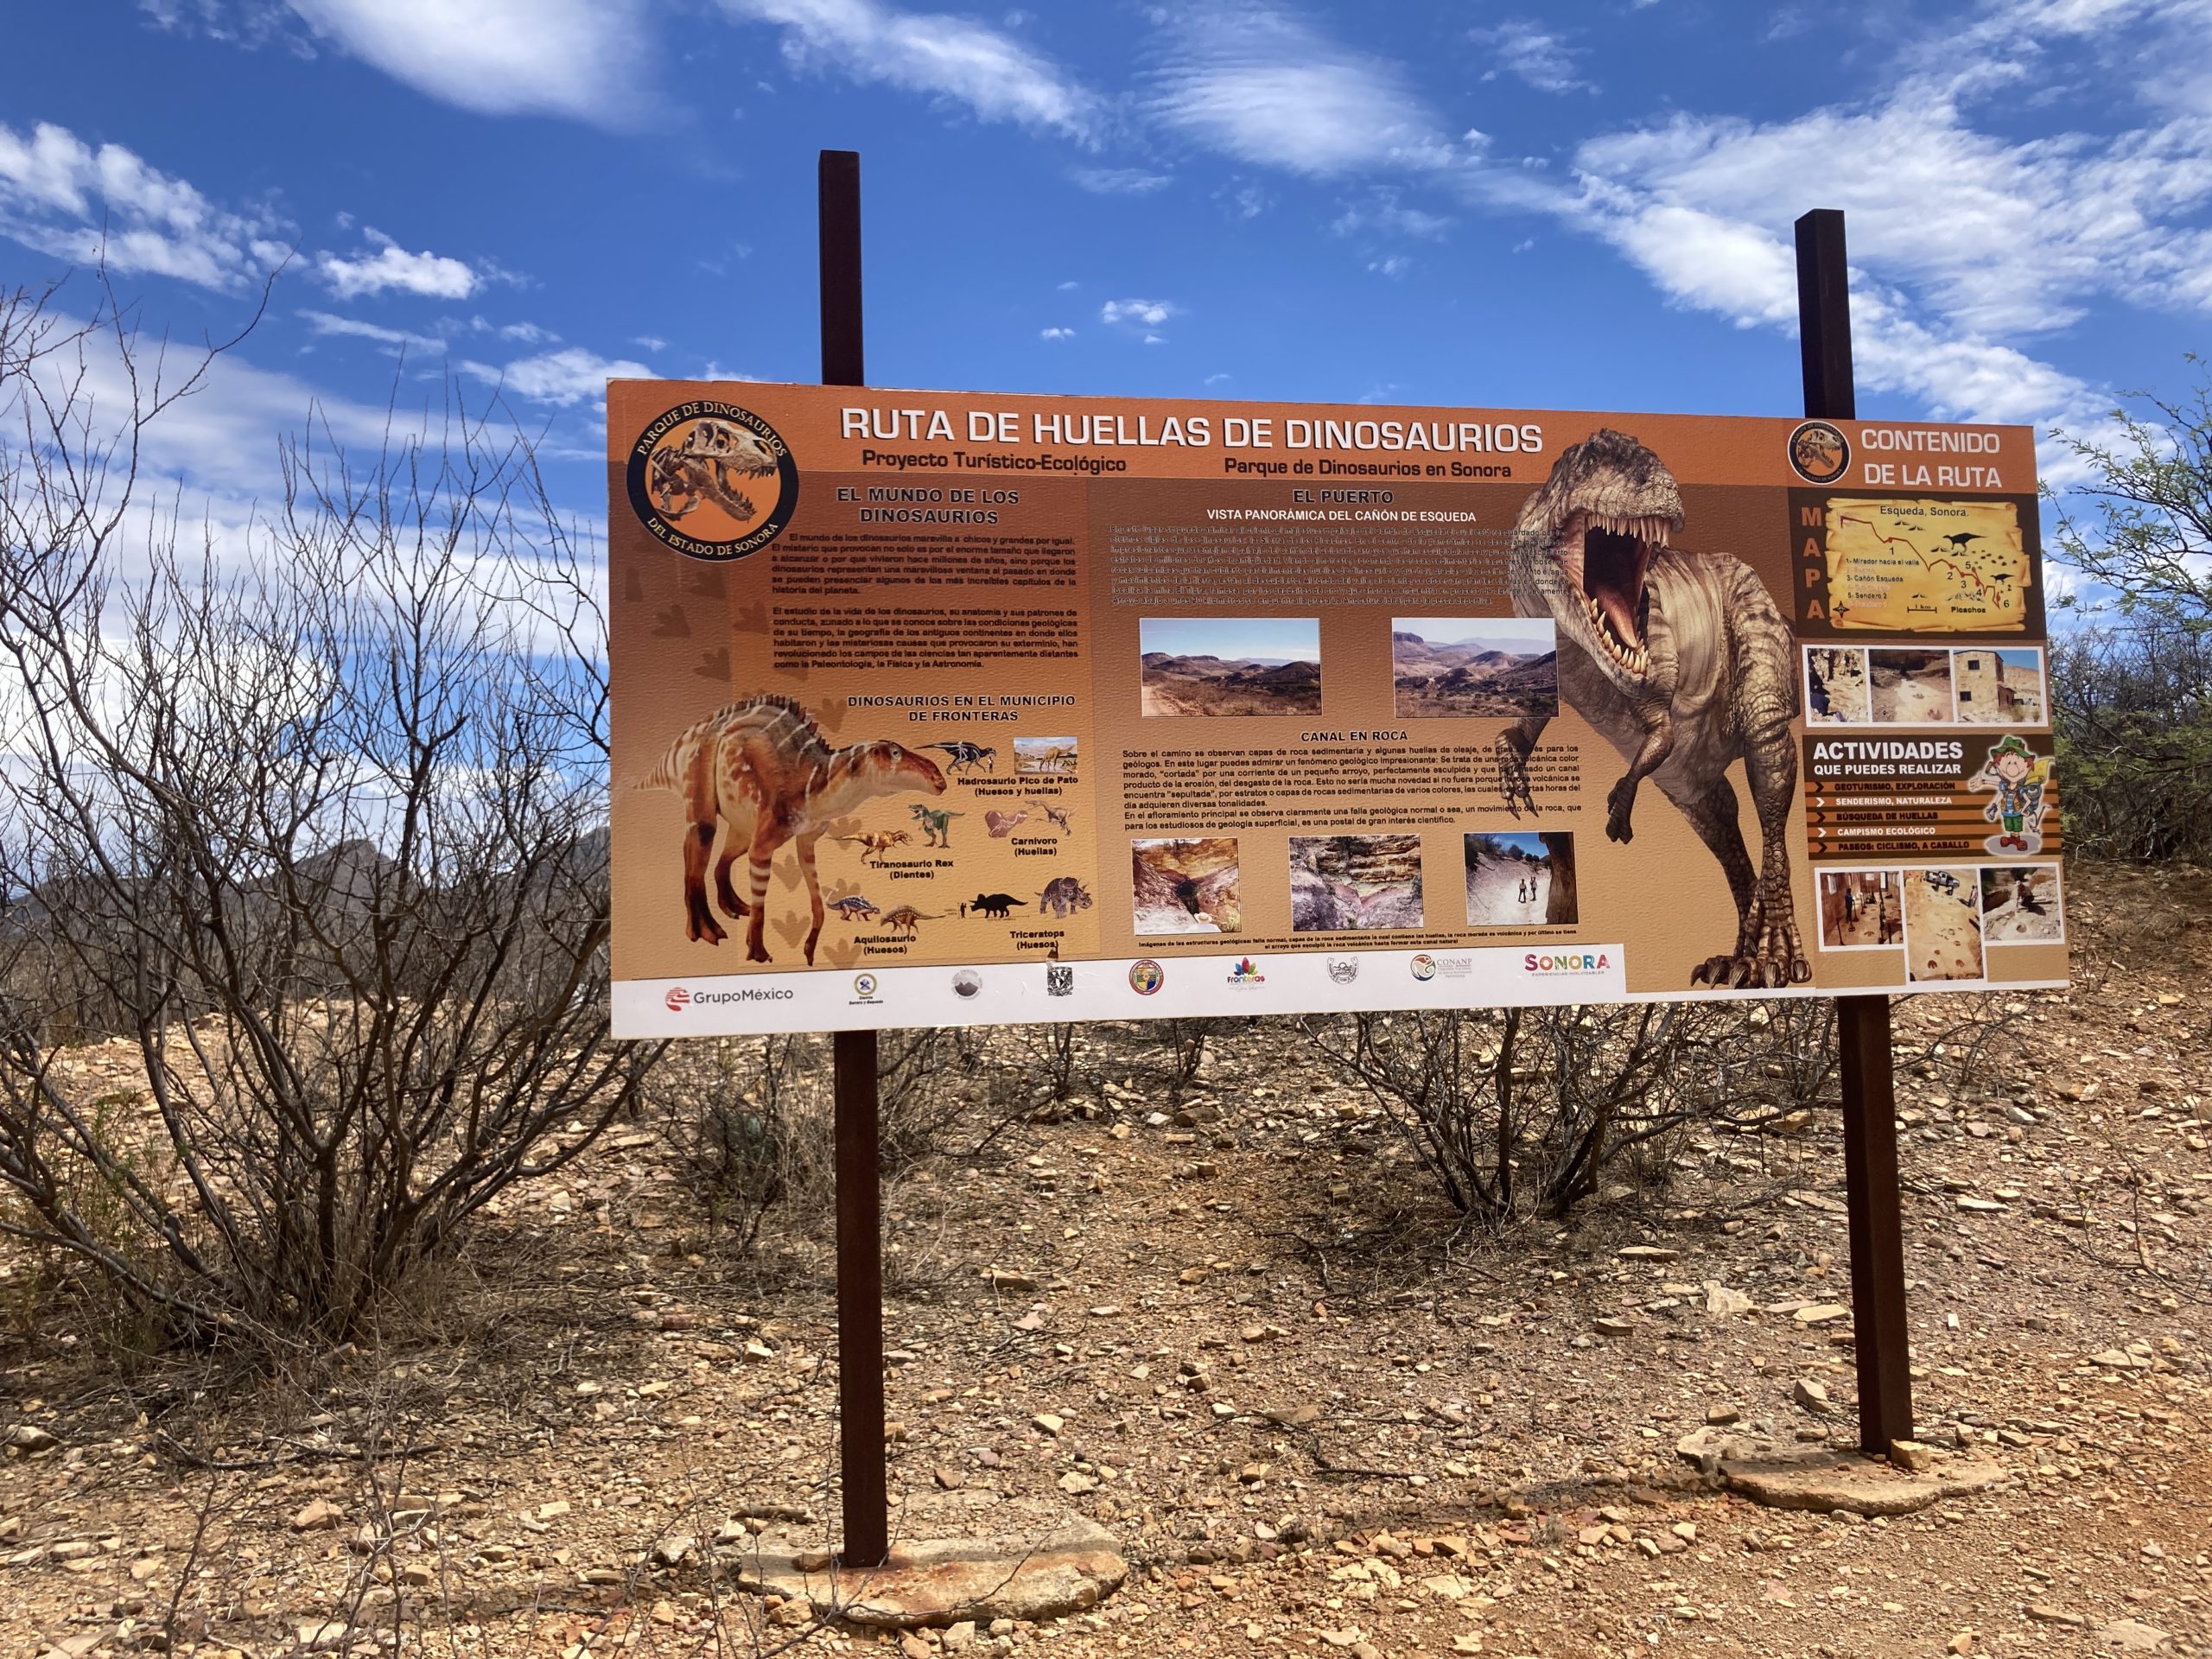 A sign, in spanish, for "La Ruta de los Dinosaurios". It shows pictures of various dinosaurs and descries how the area was 70 million years ago. In the background is a blue sky with clouds and a desert landsacpe